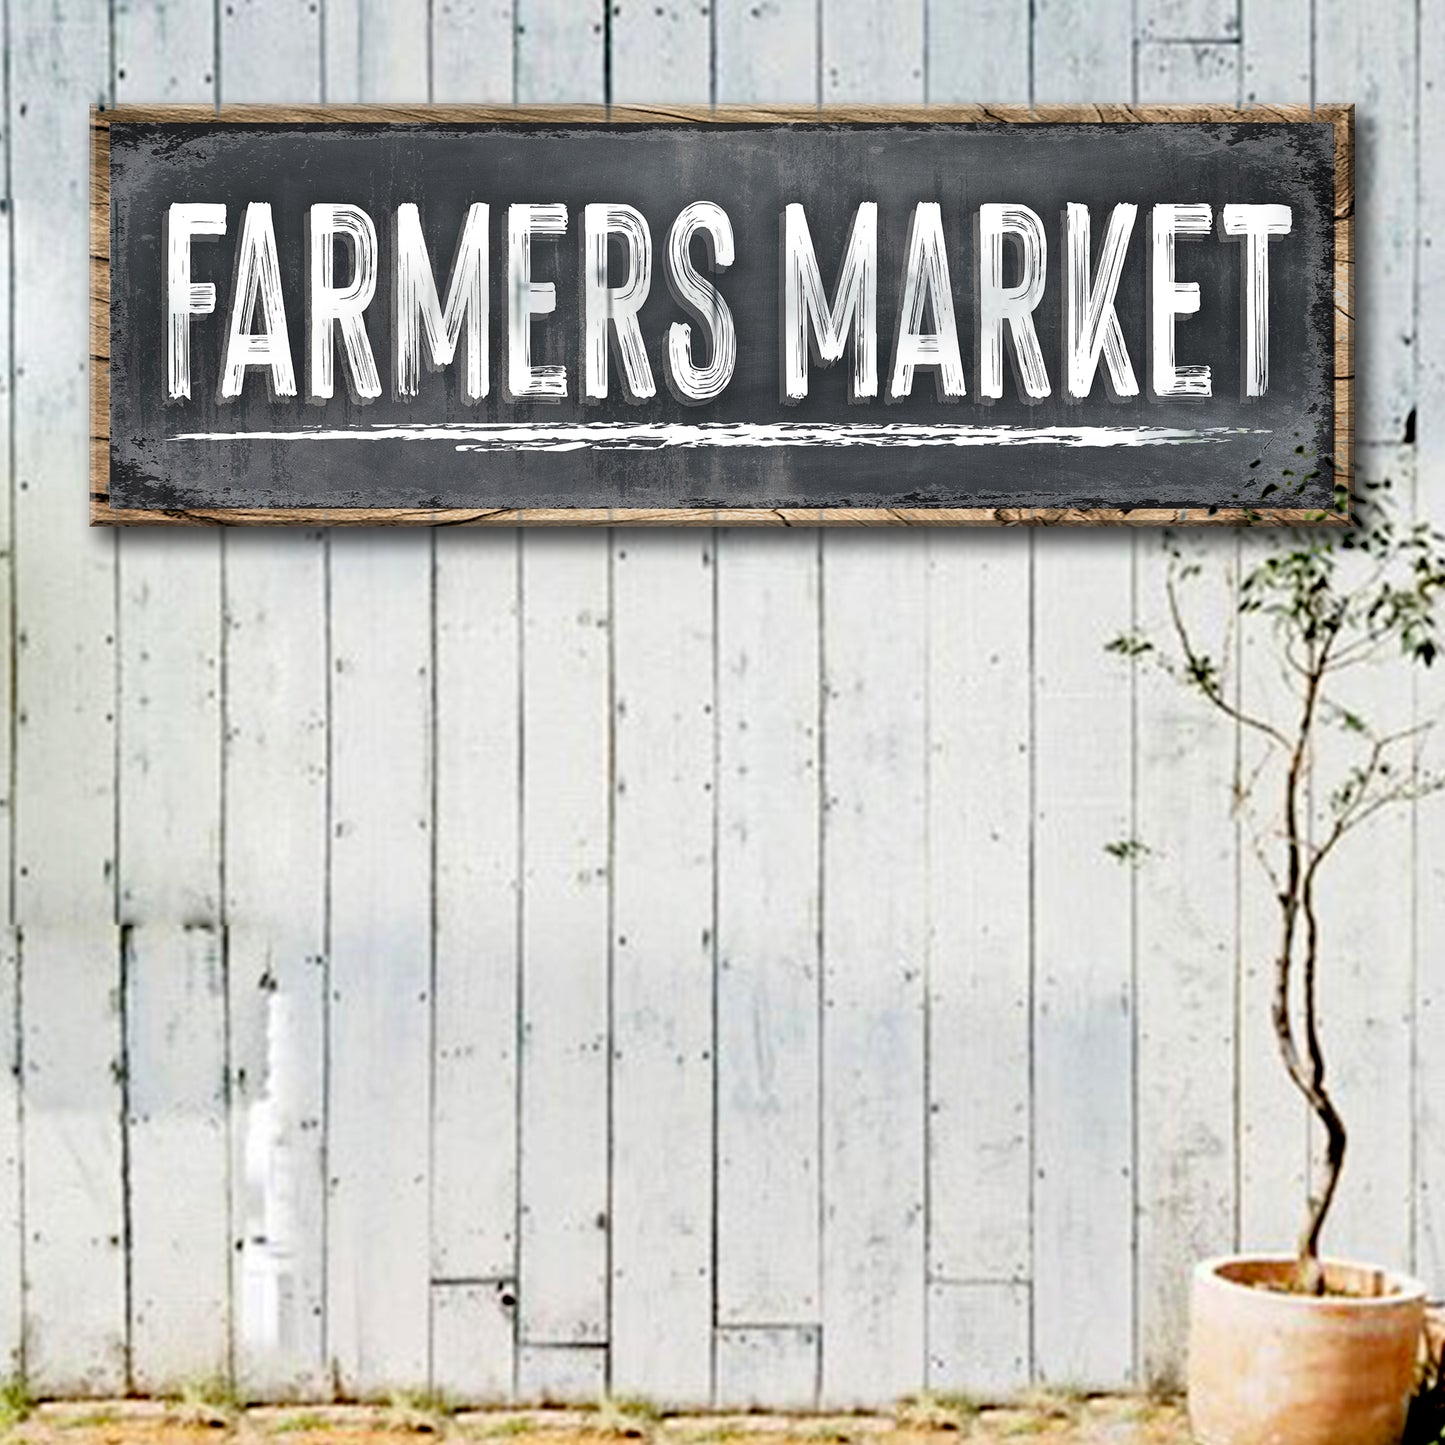 Farmers Market Sign - Image by Tailored Canvases